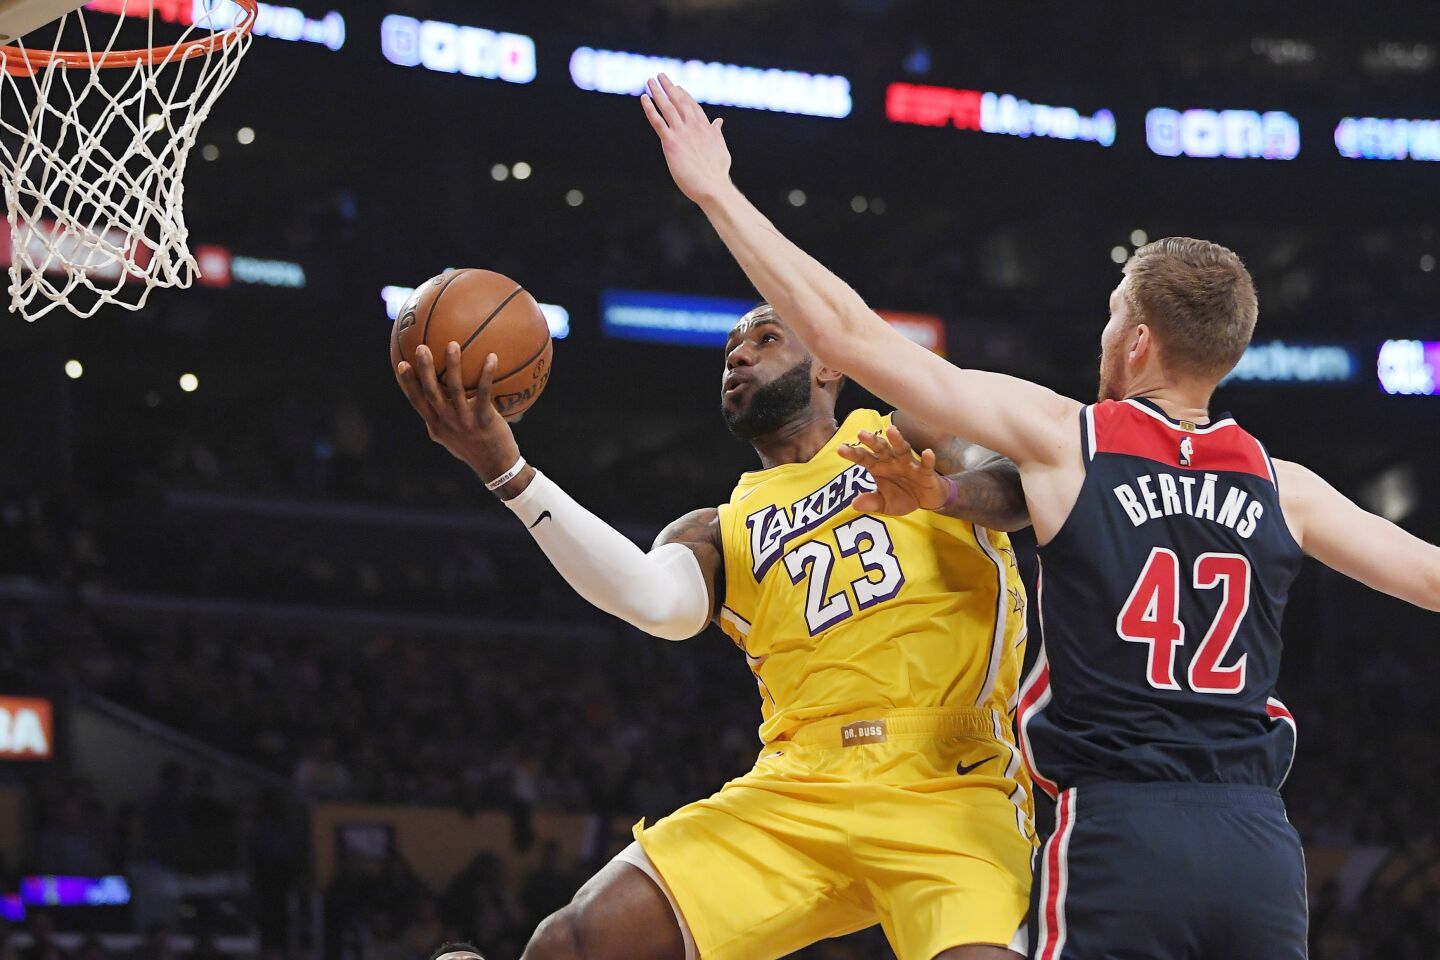 Lakers forward LeBron James goes up to the basket against Wizards forward Davis Bertans during the first half of a game Nov. 29 at Staples Center.